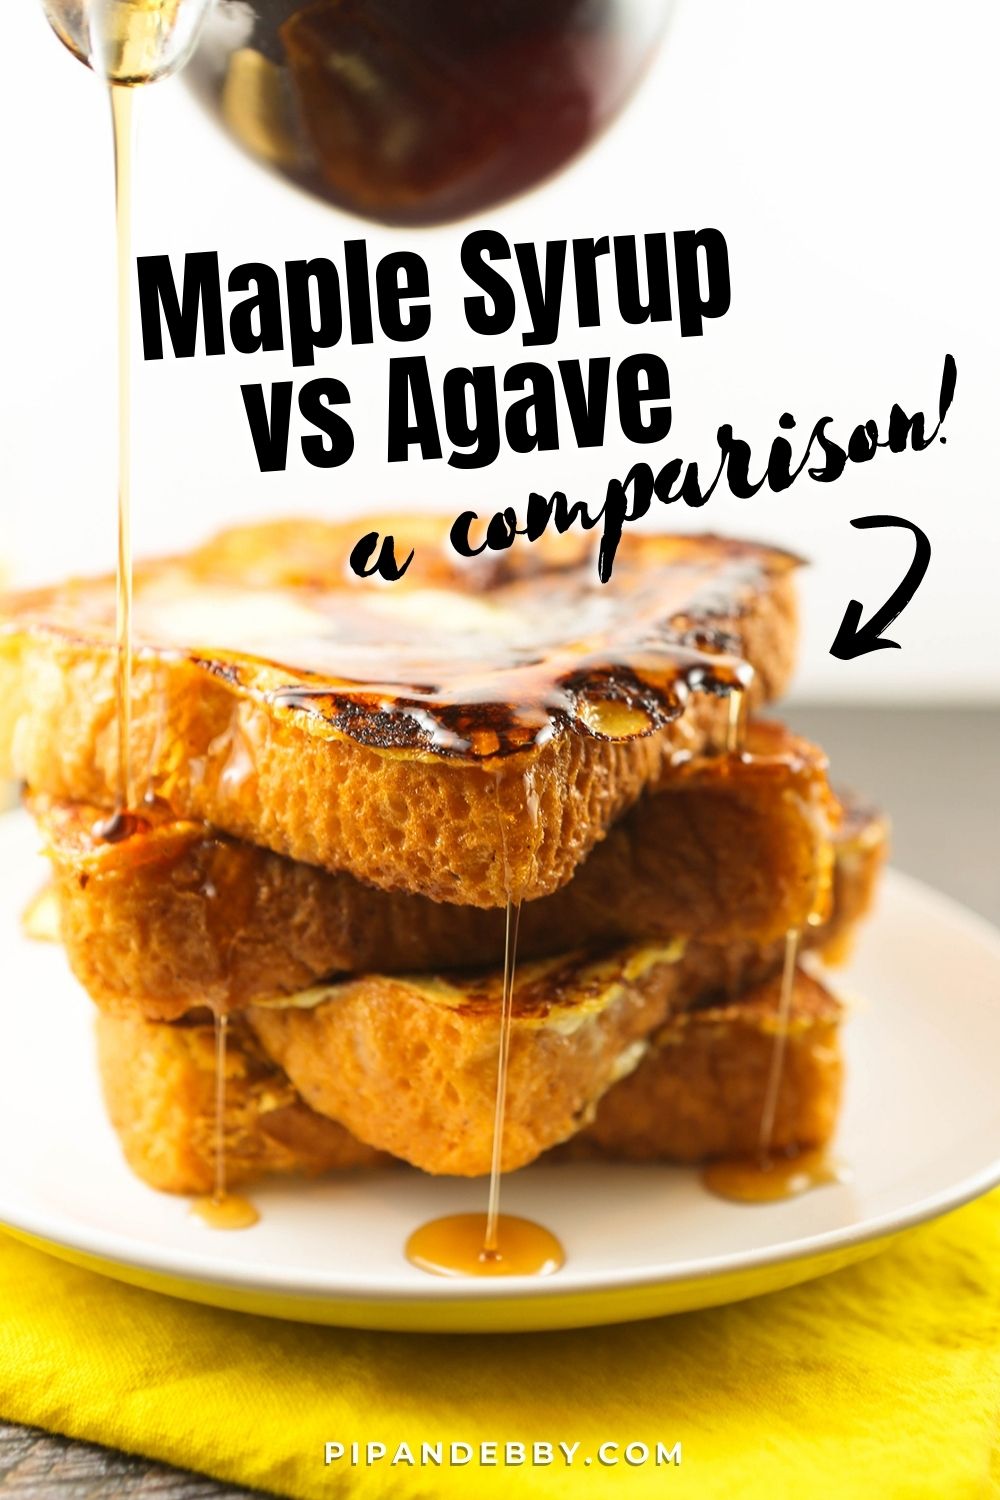 Syrup being drizzled over a stack of French toast with text overlay: "Maple syrup vs agave: a comparison."